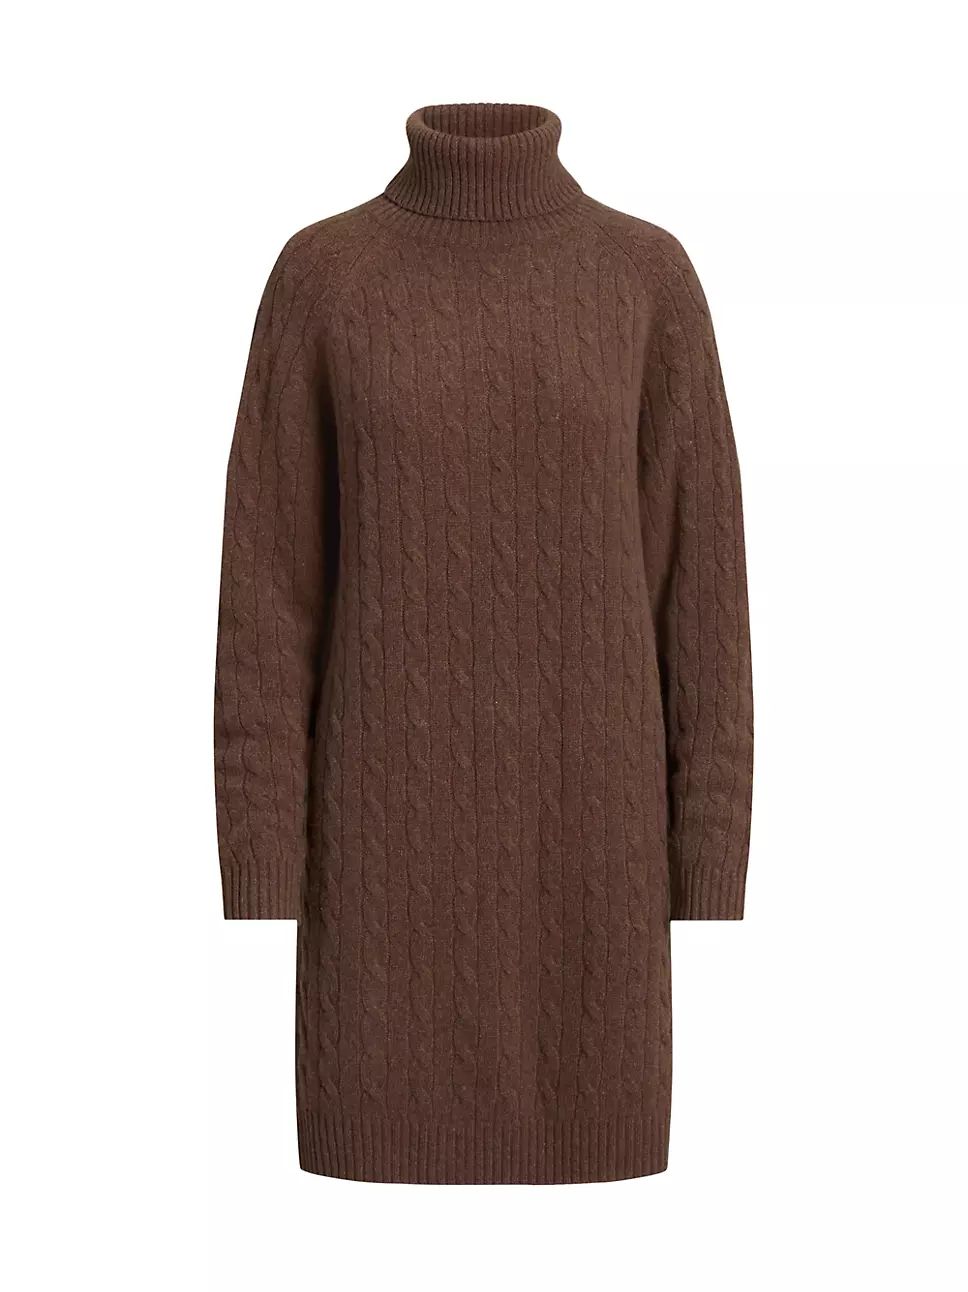 Wool-Cashmere Cable-Knit Sweaterdress | Saks Fifth Avenue